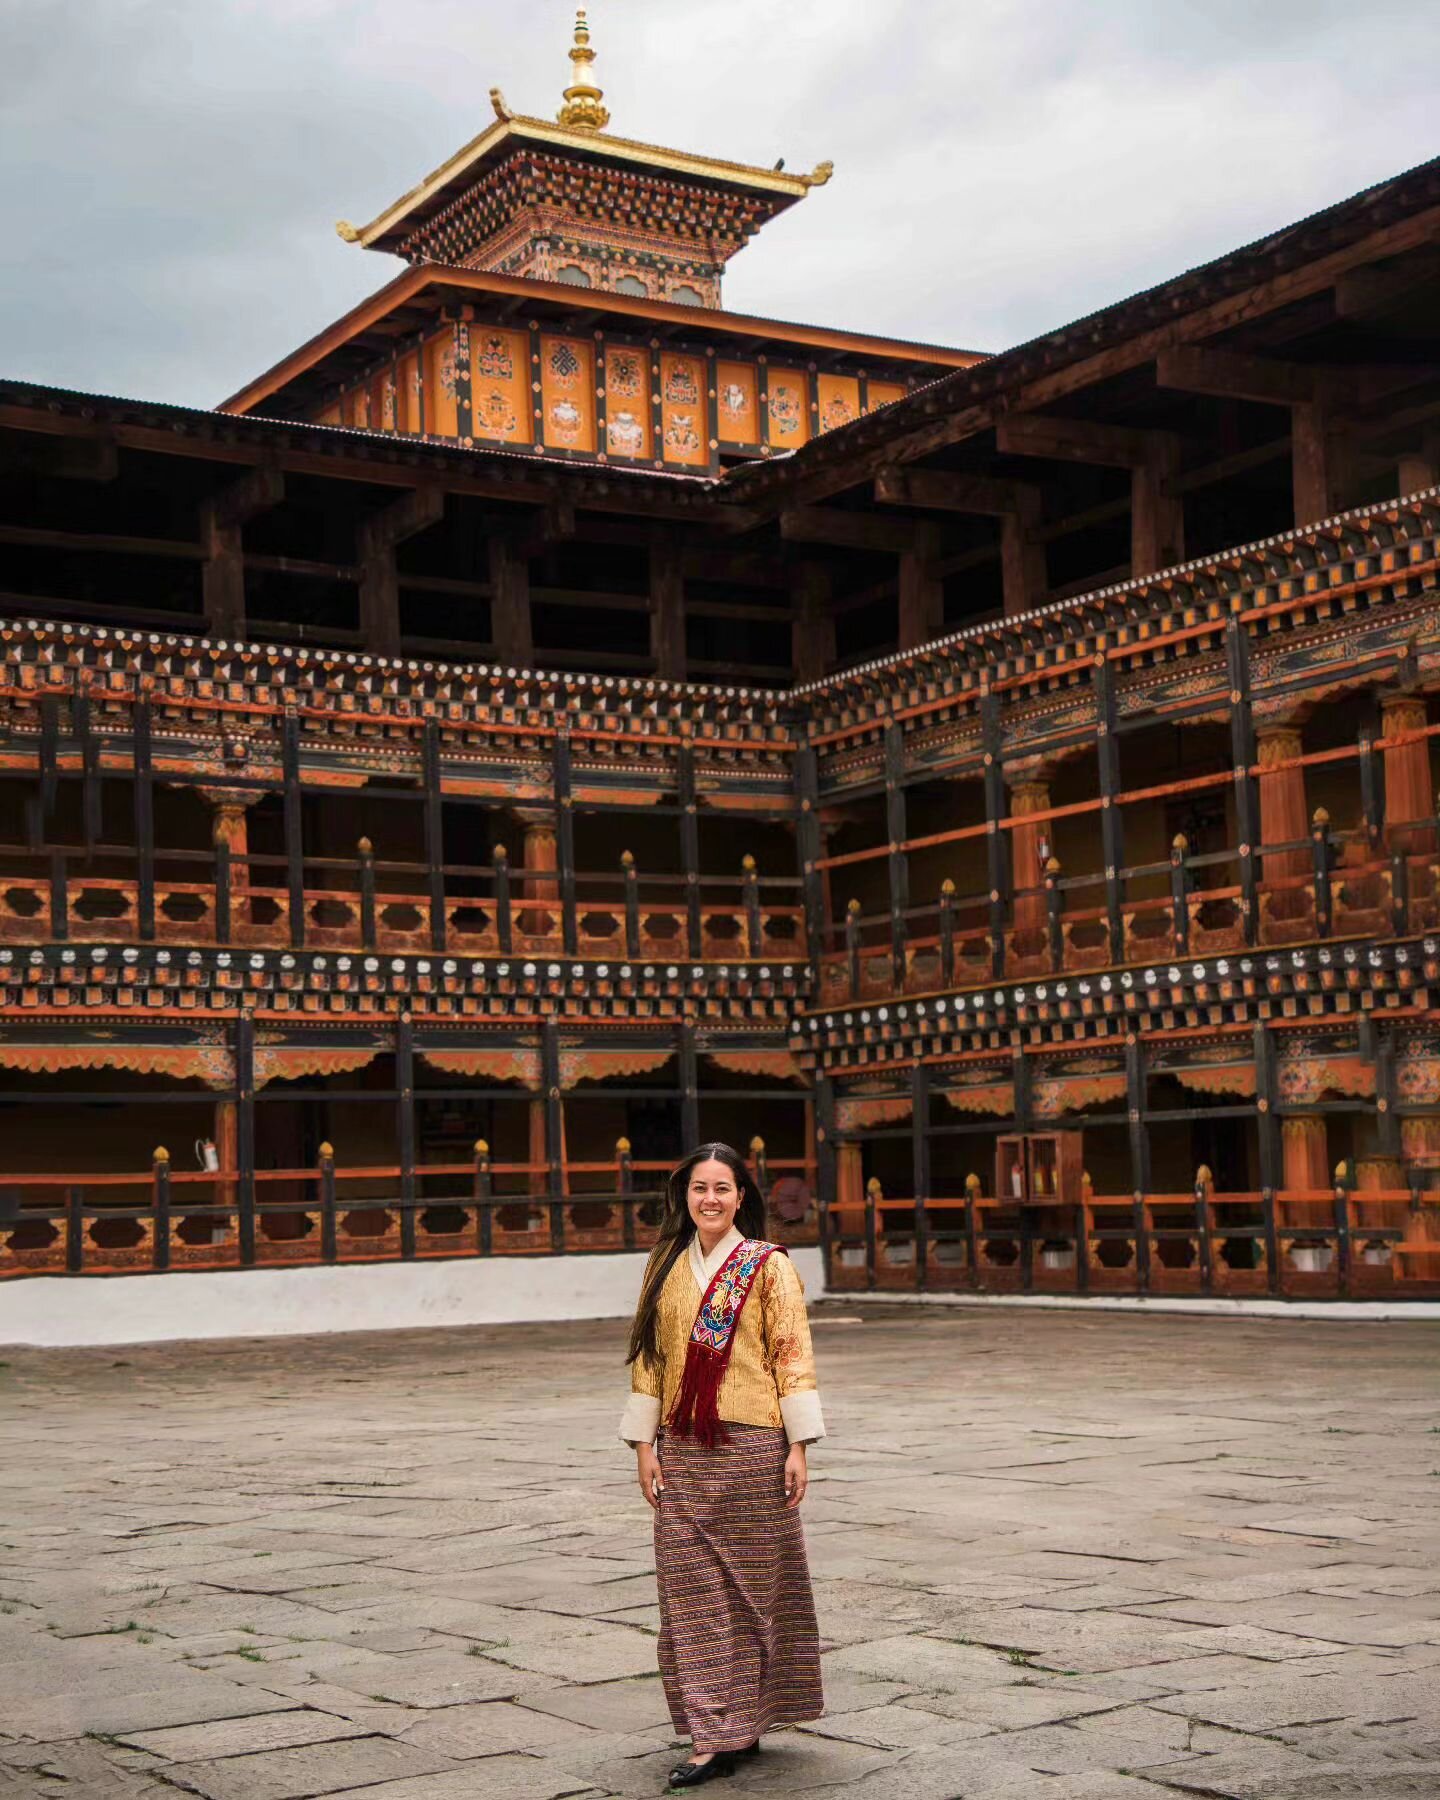 B H U T A N 🇧🇹 A remote kingdom in the Himalayas, Bhutan regulates the number of tourists that can visit for environmental and cultural preservation efforts. With an SDF (Sustainable Development Fee) of $100 per day, it's not the cheapest country t